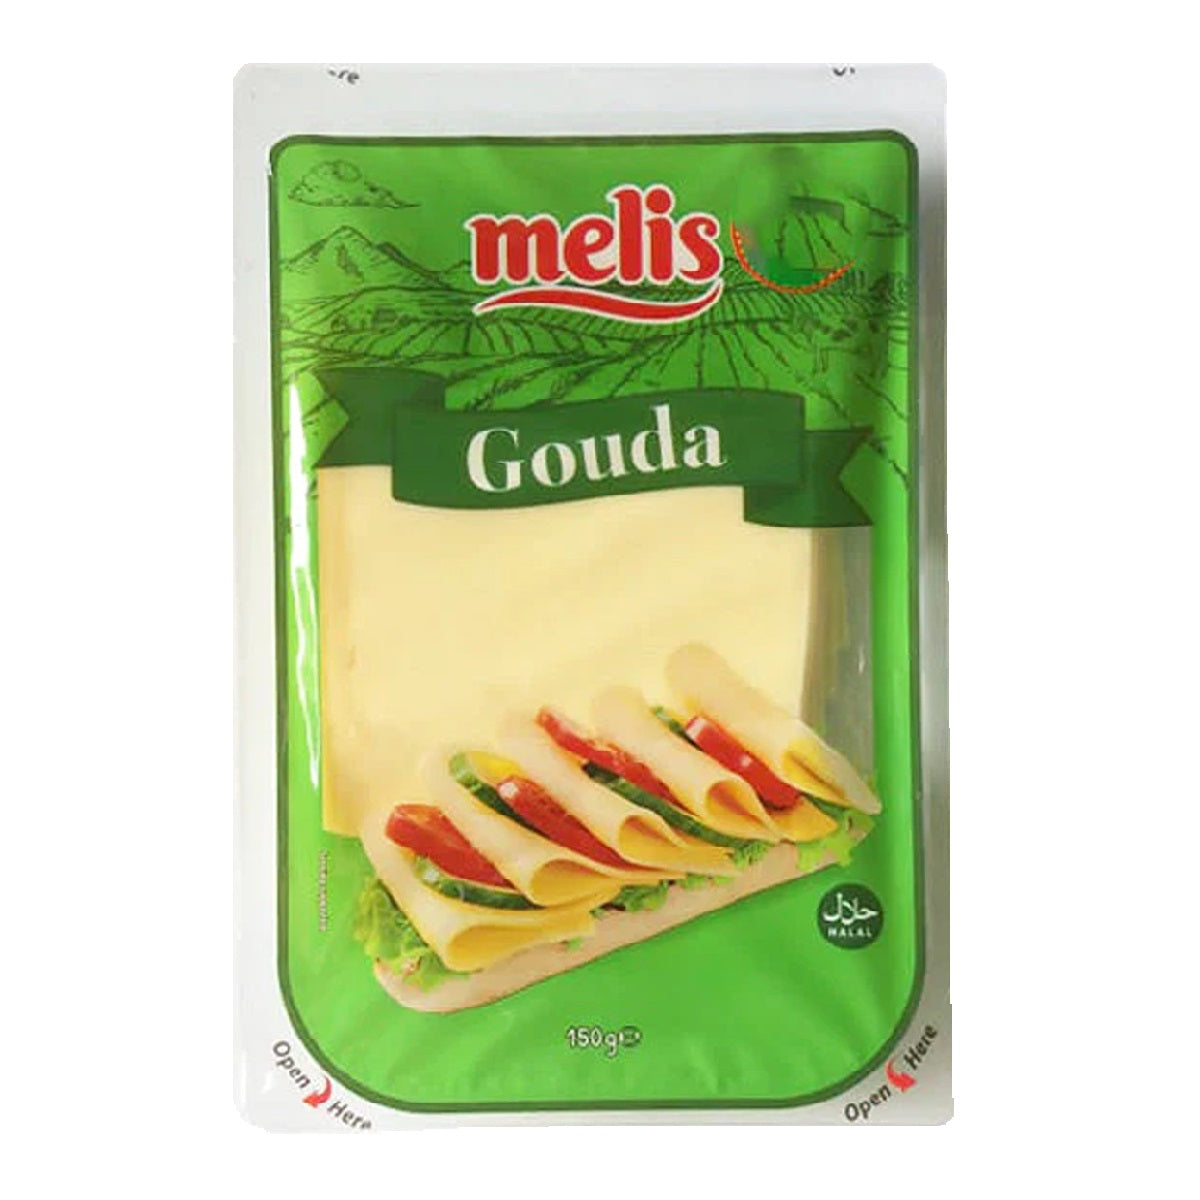 Melis - Sliced Gouda Cheese - 150g - Continental Food Store